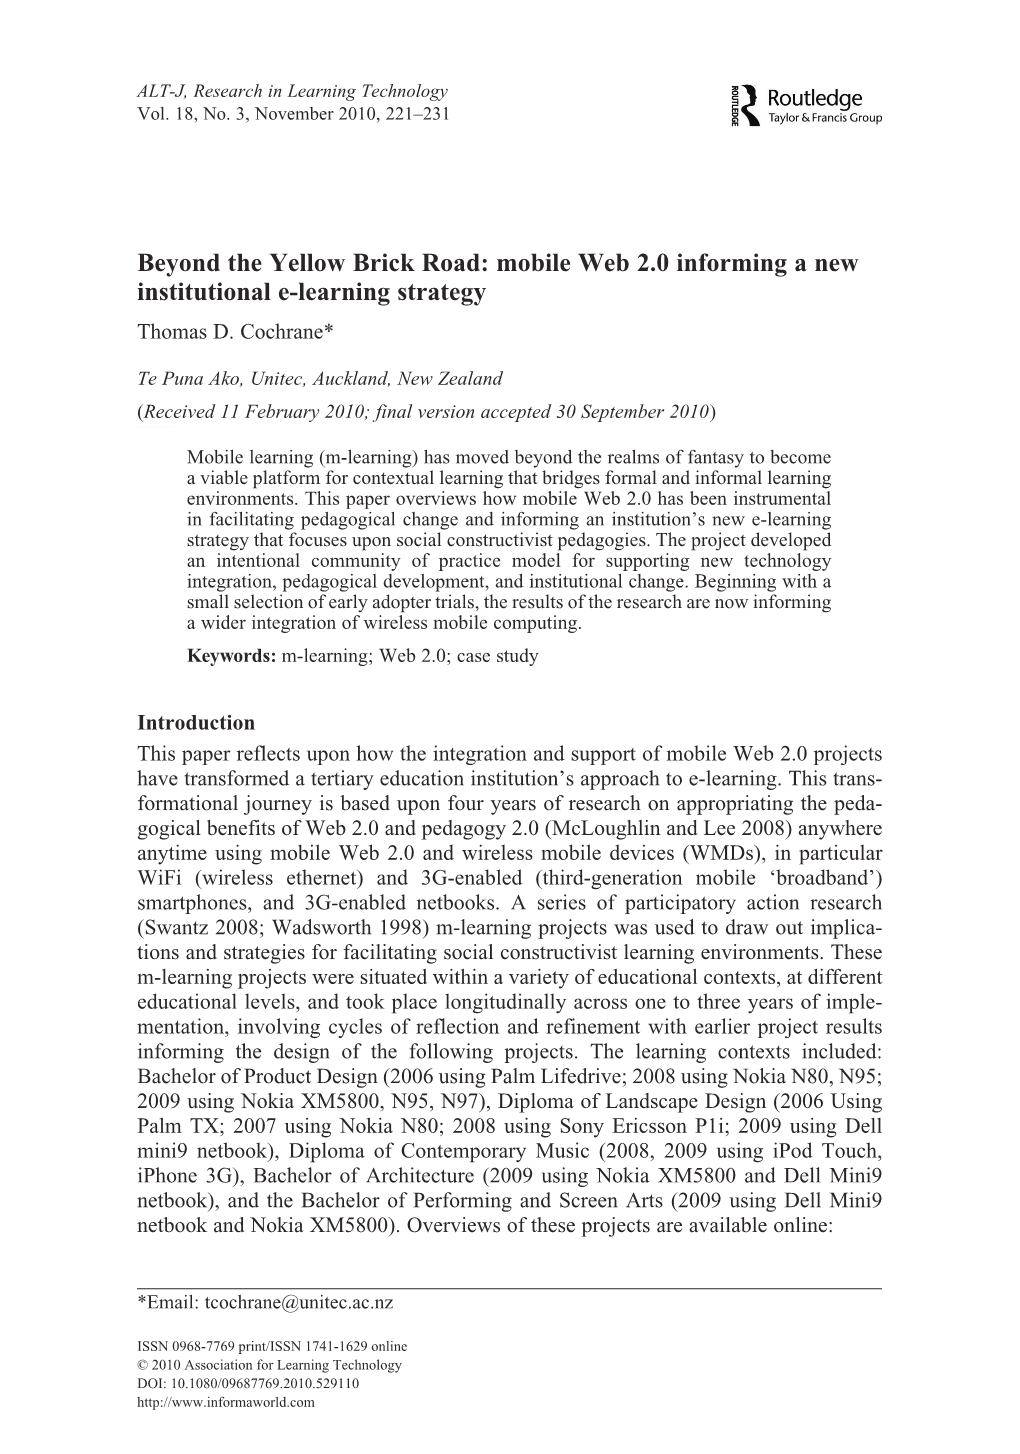 Mobile Web 2.0 Informing a New Institutional E-Learning Strategy Thomas D